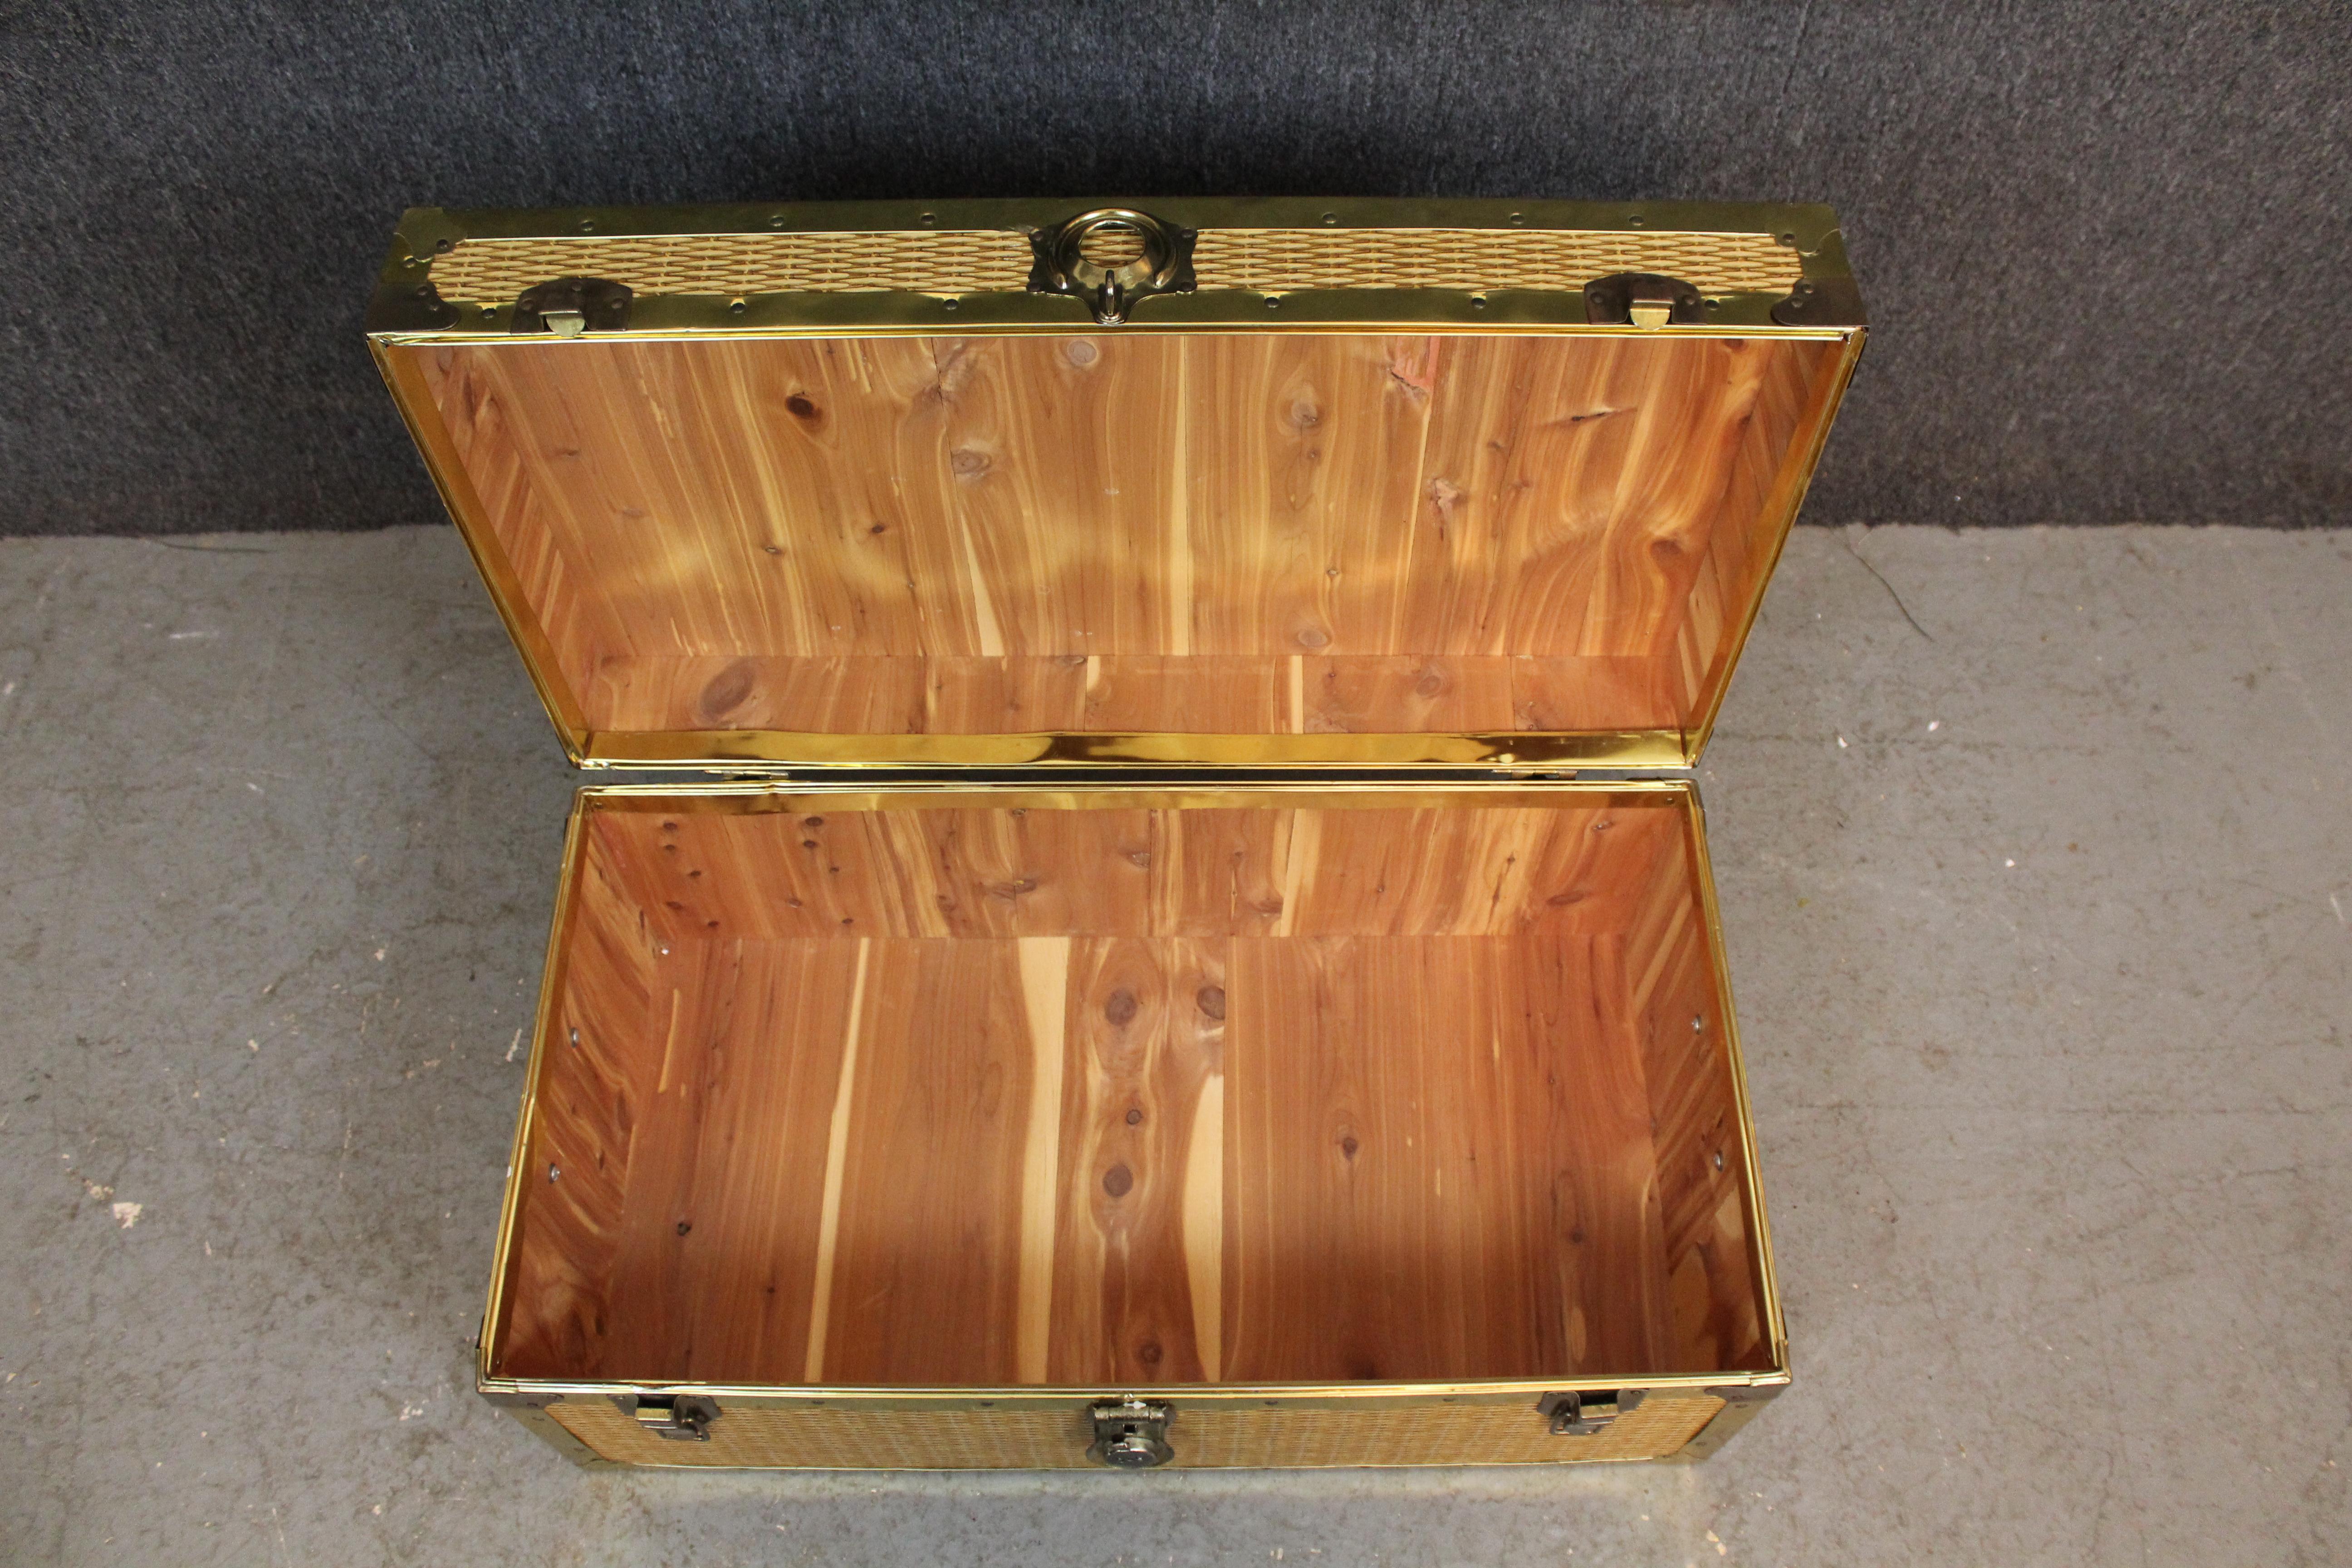 If you're looking for a Canadian brass & cedar trunk, look no further than Union Trunk Sanitized®. This truly awesome piece features a 5-sided rattan covering with a fun brass trim. A full cedar lining is in place to keep your blankets, duvets, and